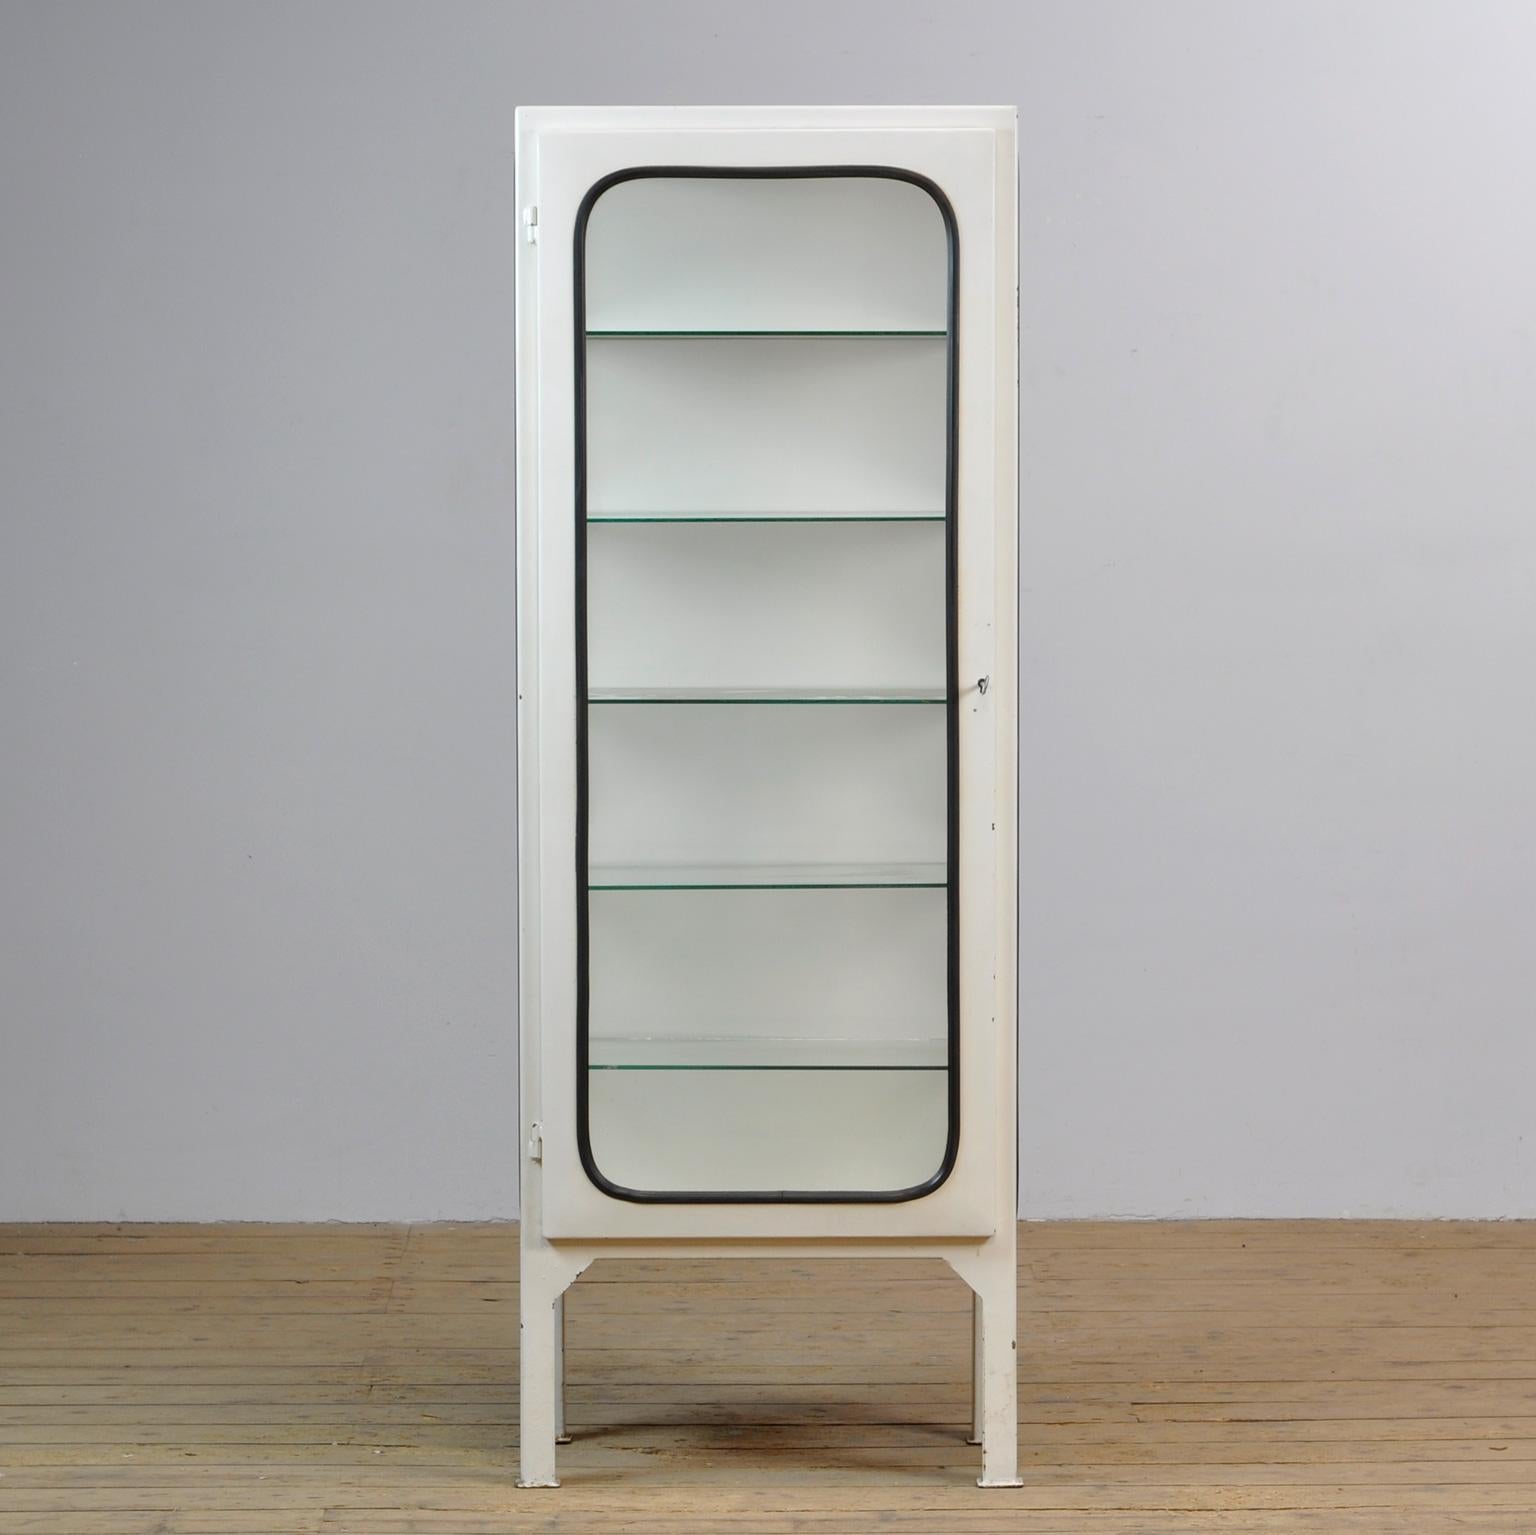 This medical cabinet was designed in the 1970s and produced in 1975 in hungary. It is made from iron and antique glass. The glass is held in place by a black rubber strip. The cabinet features five adjustable glass shelves and a functioning